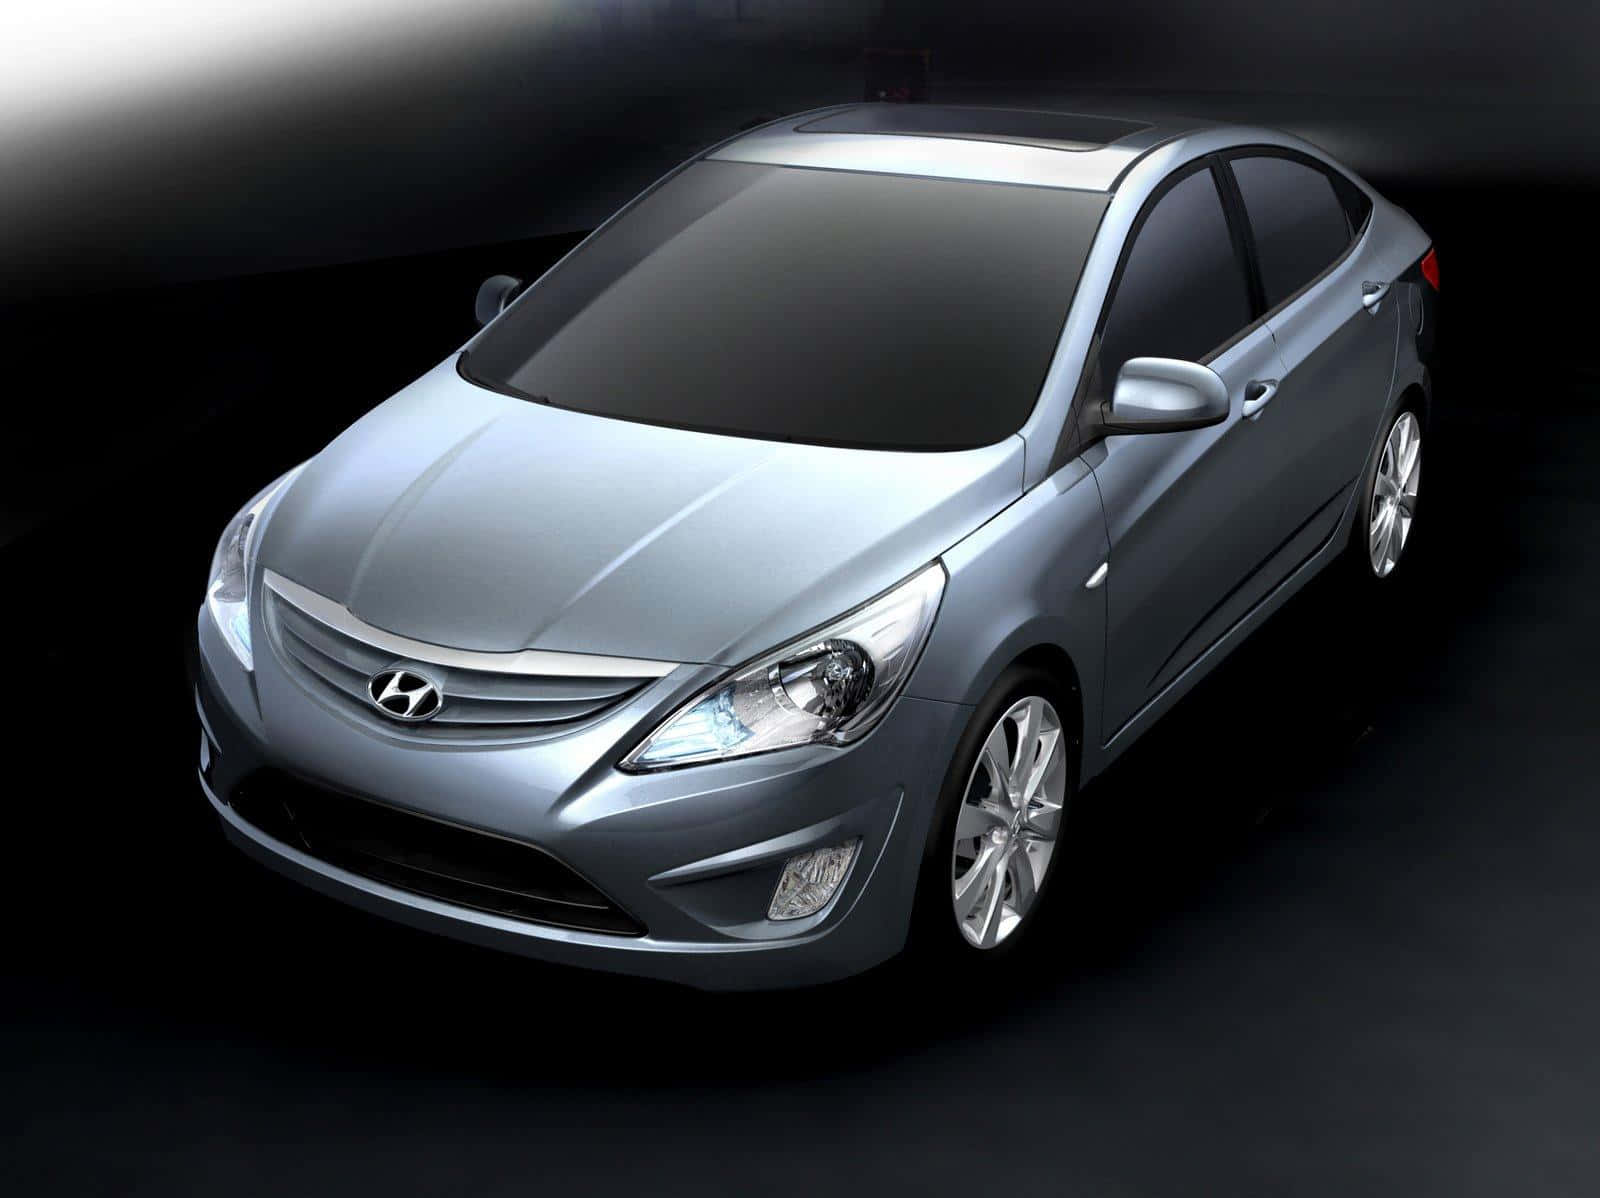 Get started with the stylish, highly efficient Hyundai